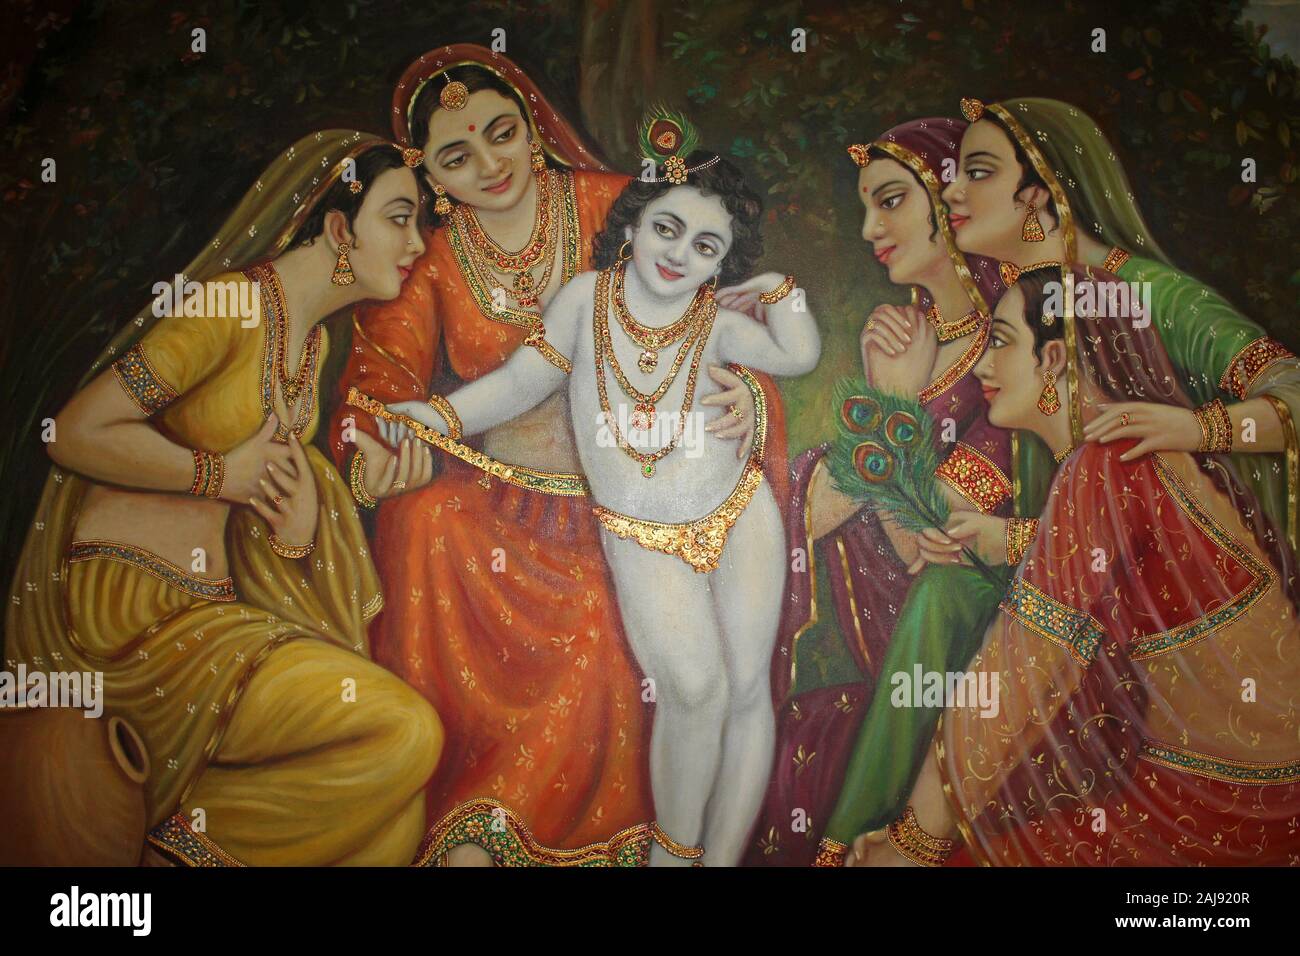 Painting showing a young Krishna surrounded by women devotees Stock Photo